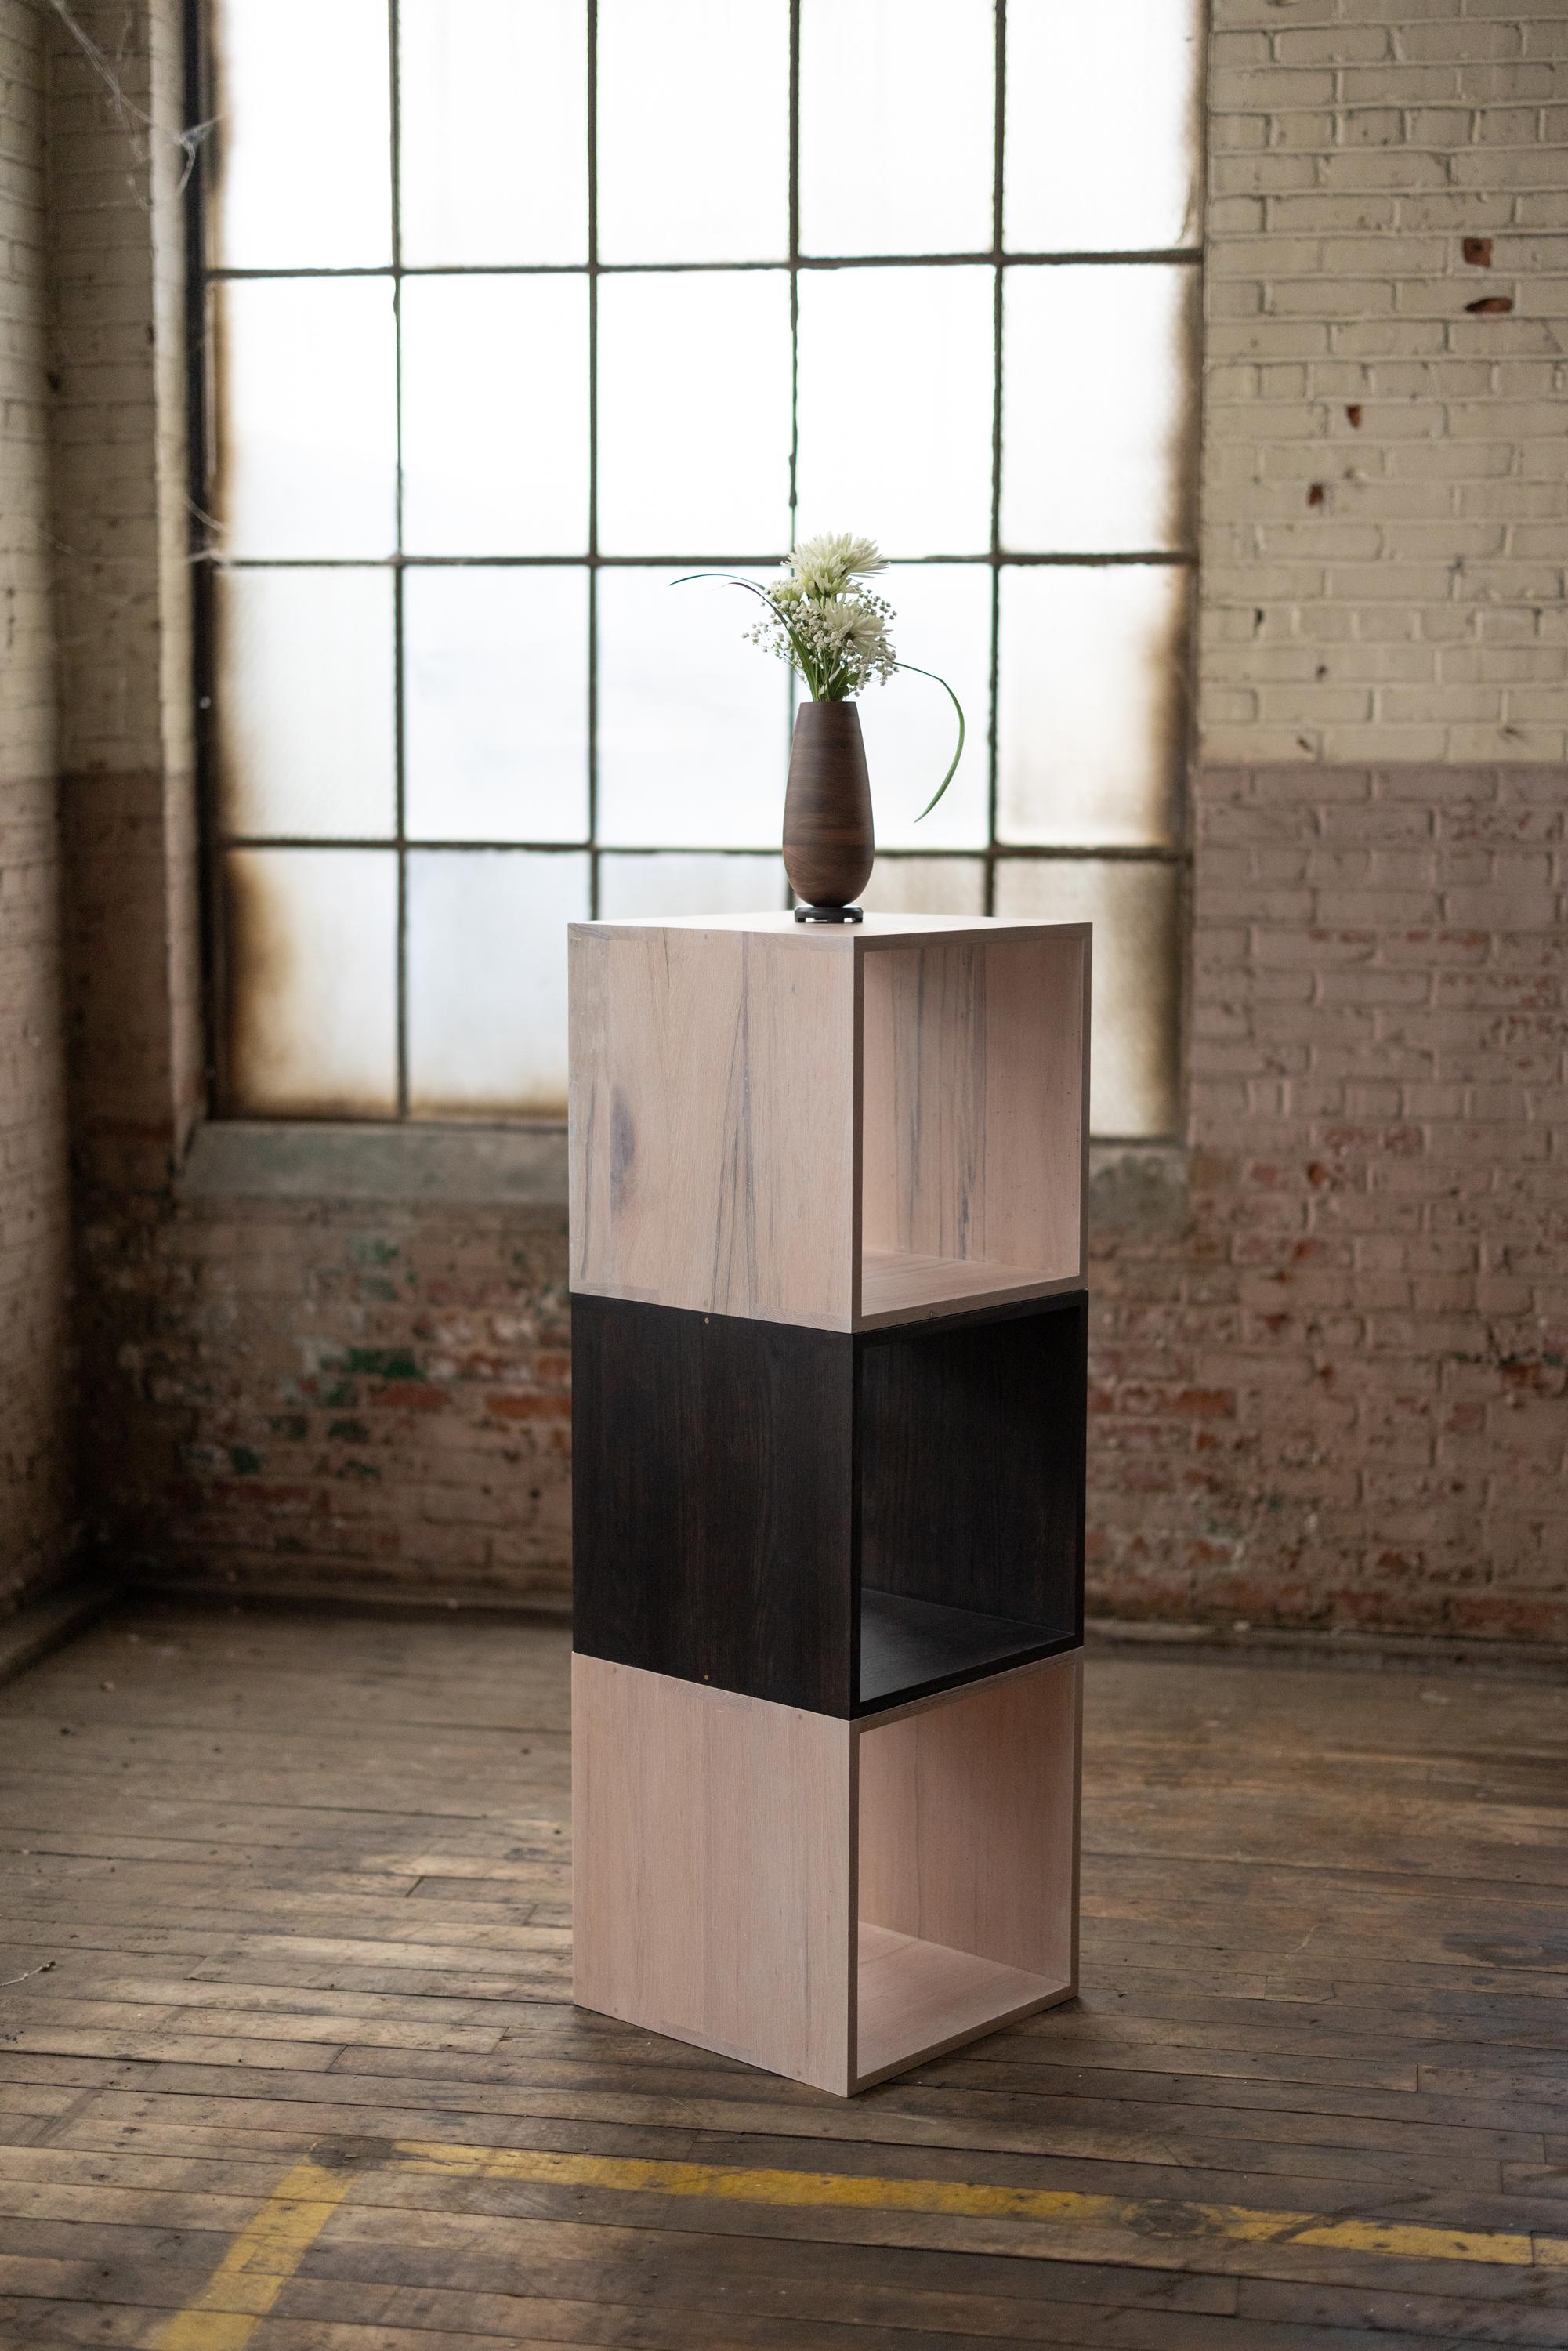 These modern solid oakwood cocktail cubes with bronze details are the right height for a coffee table or cocktail table for drinks and tapas. The interior fits records, books or collections of any kind. Arrange as one, a pair or a foursome for a